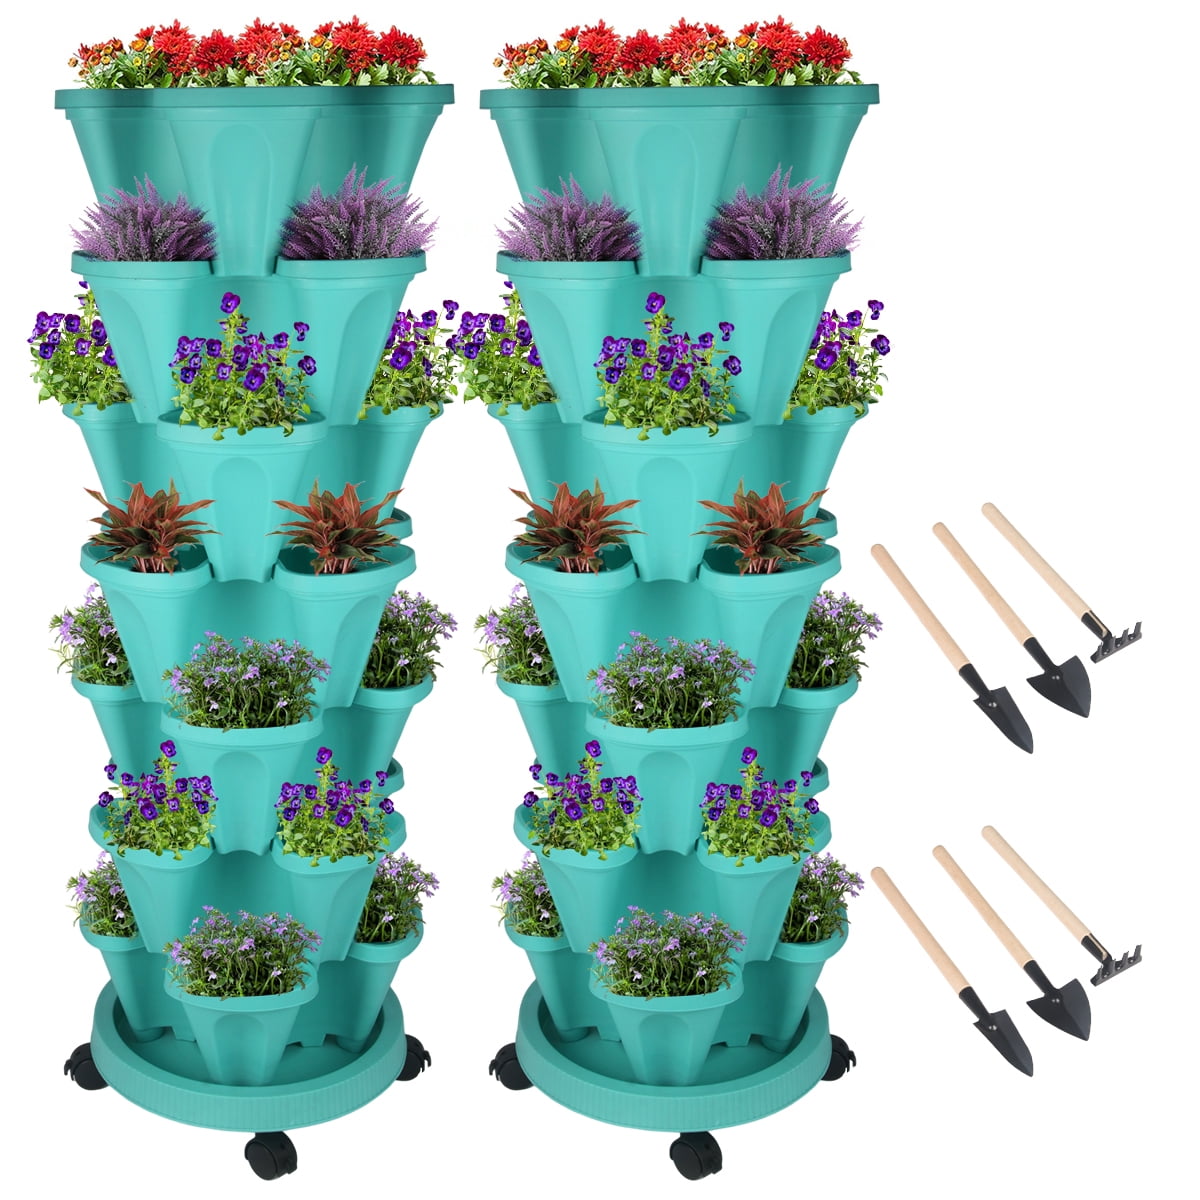 Stackable Planter with Wheels and Tools, Tower Garden Planters, Indoor